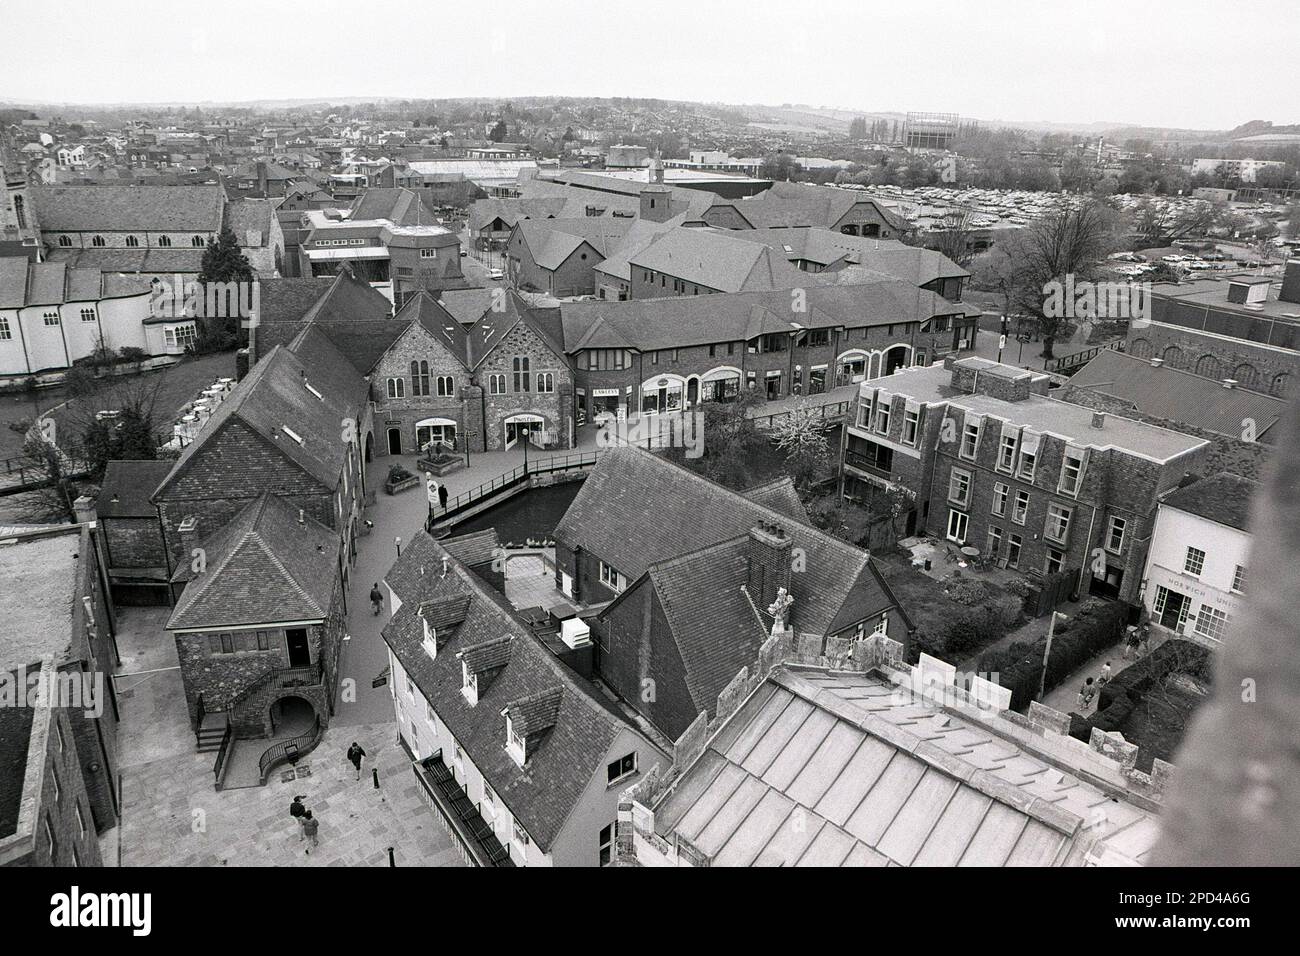 The Maltings, Salisbury's riverside shopping area. Circa 1991. Photograph taken following the rebuild after a serious fire destroyed the original shops in the late 1980s. Stock Photo